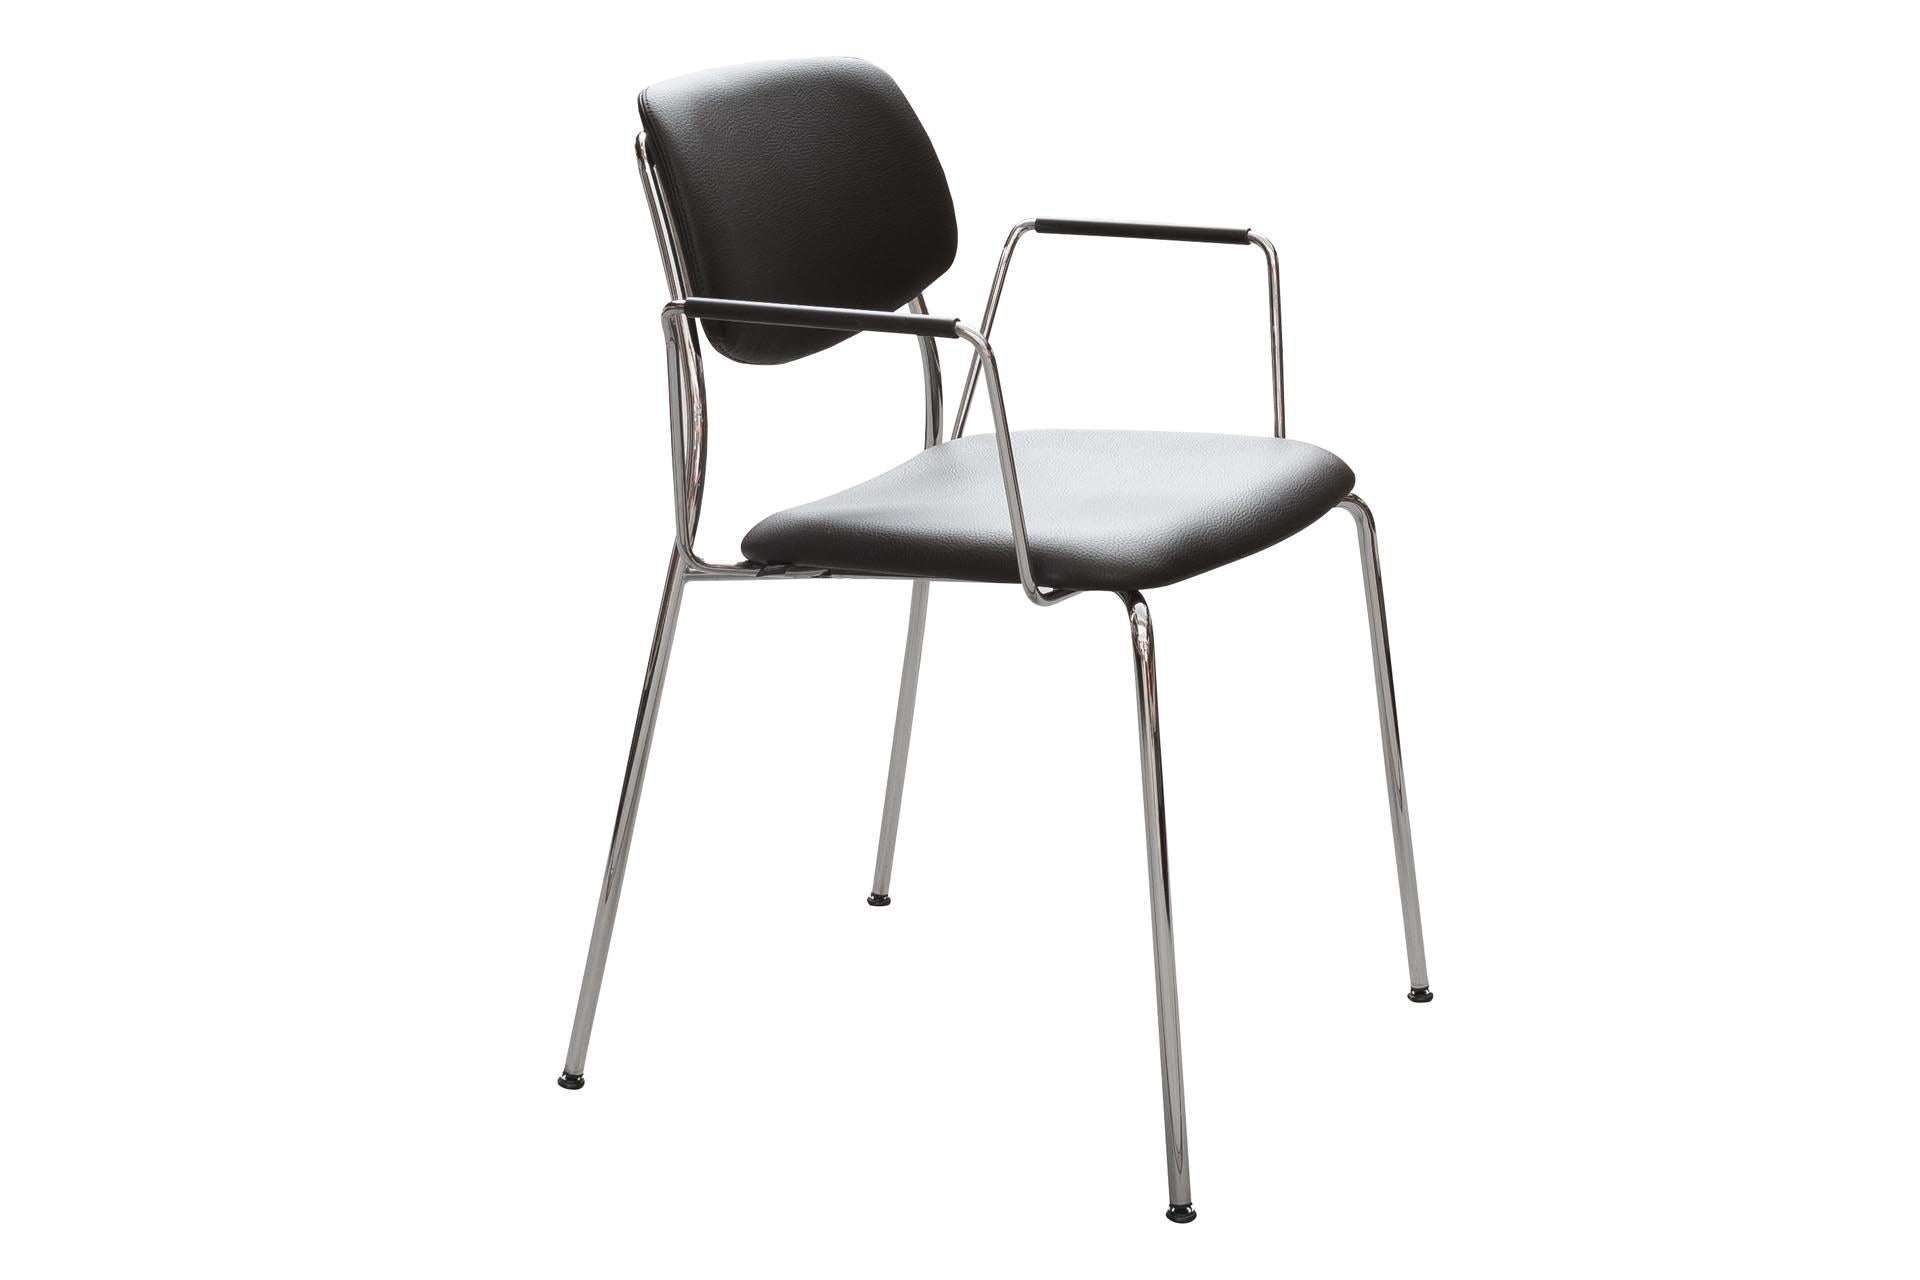 Swiss Dietiker Felber C14 Metal Dining Chair with Arms, Modular Design, Set of 4 For Sale